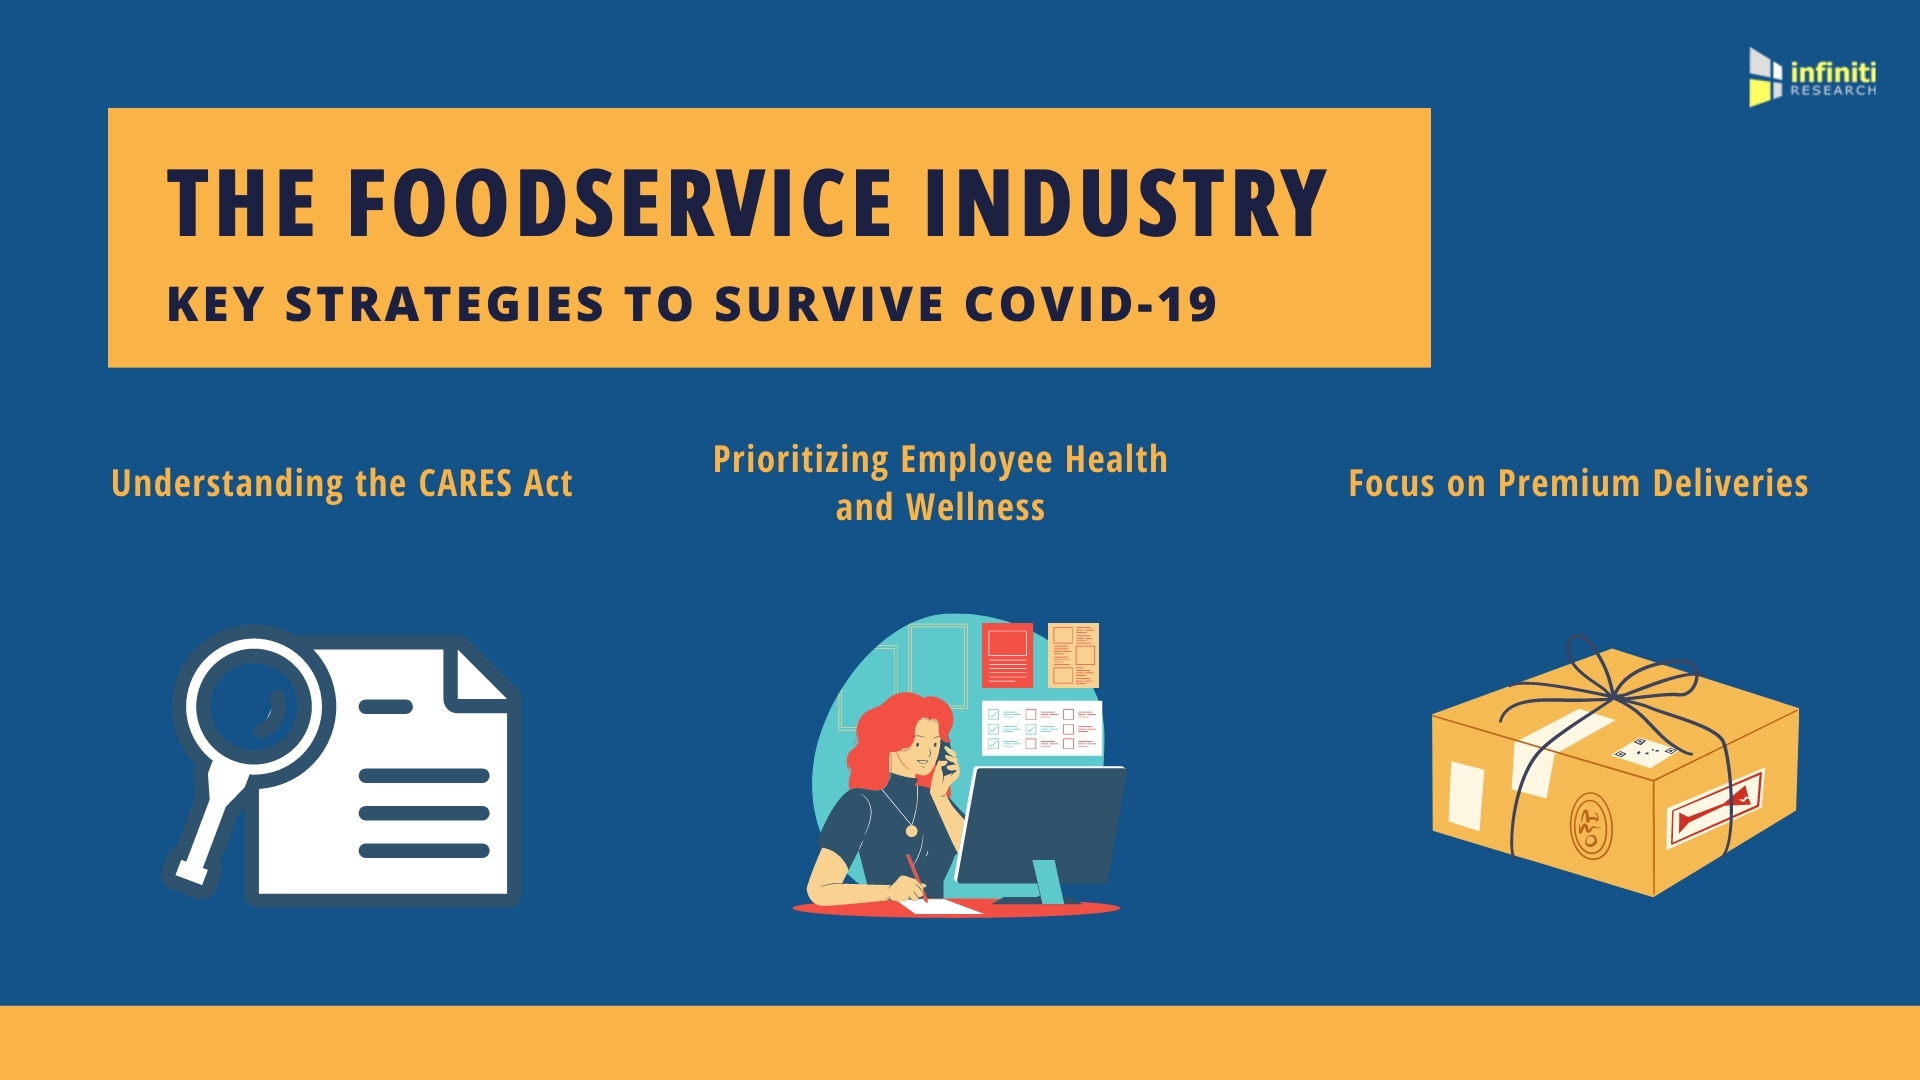 Key Survival Strategies For The Food Service Industry During The Covid